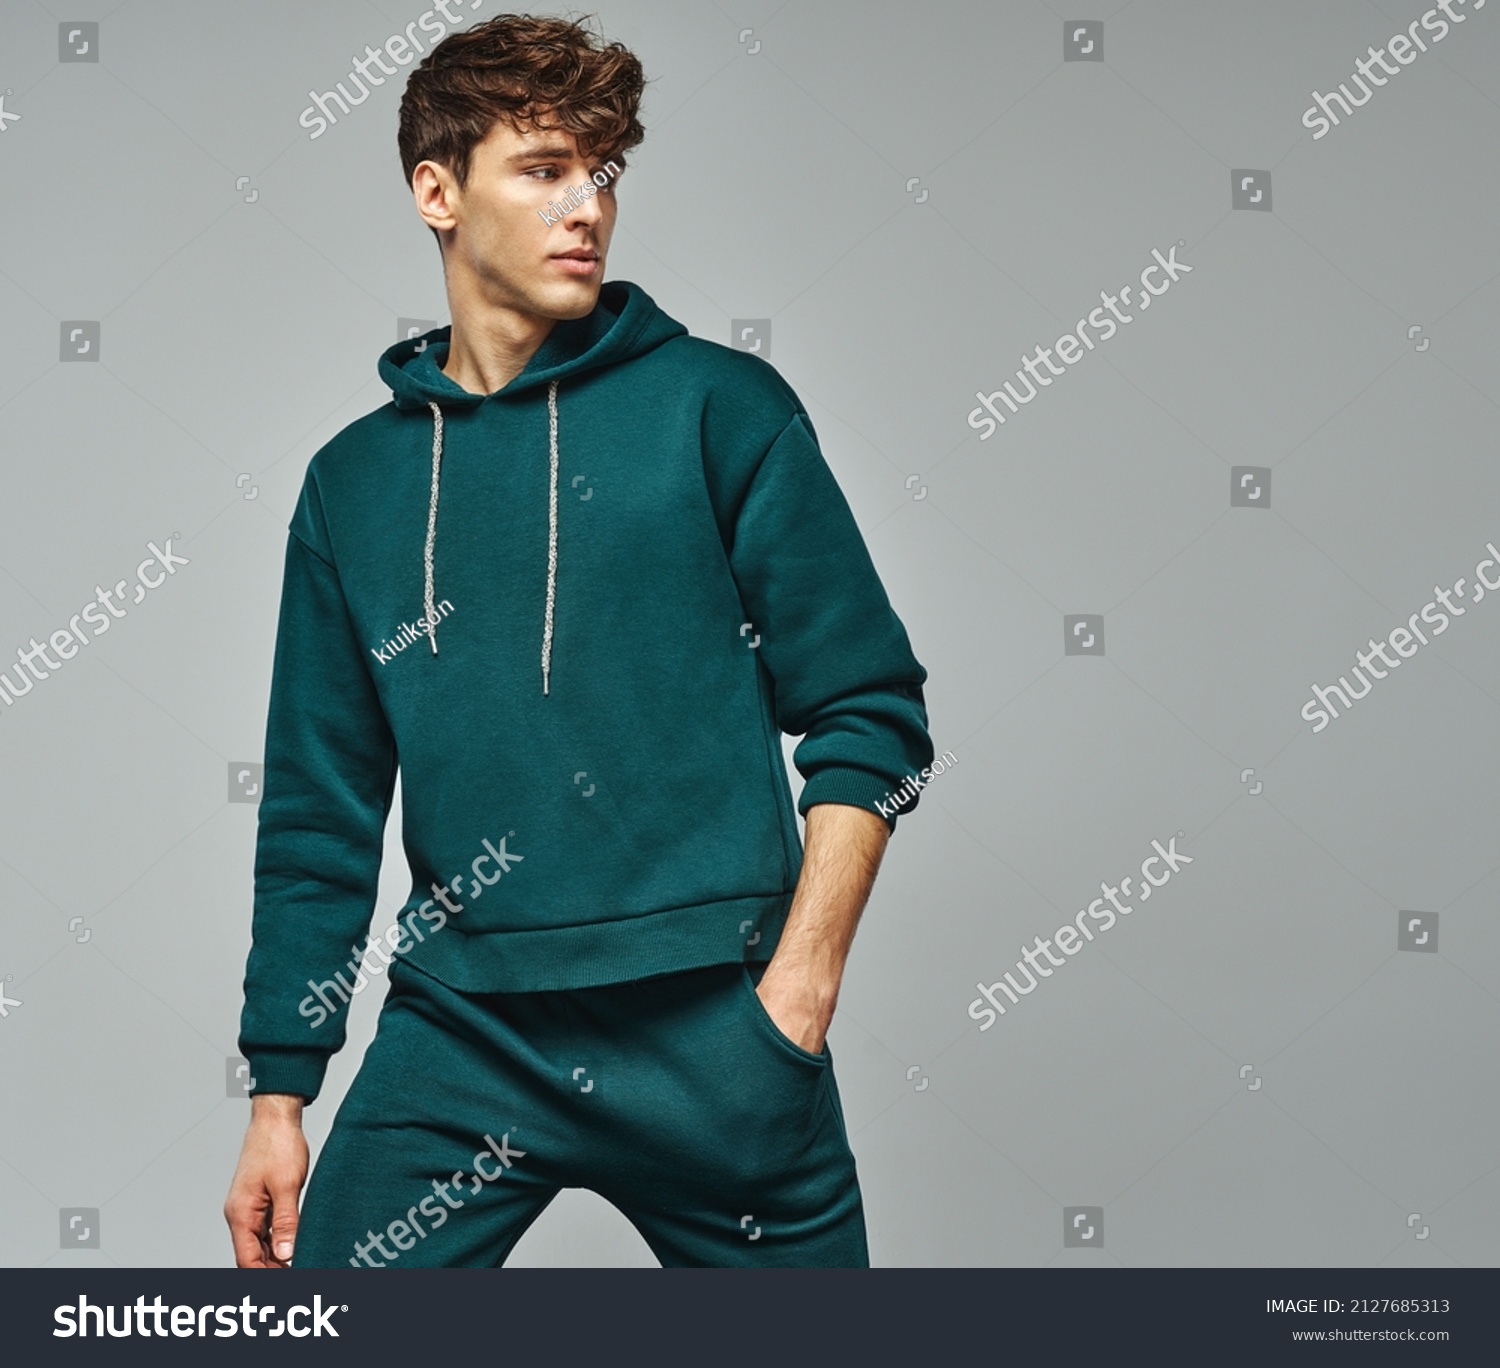 Handsome man wear of green set of track suit isolated on grayl background #2127685313